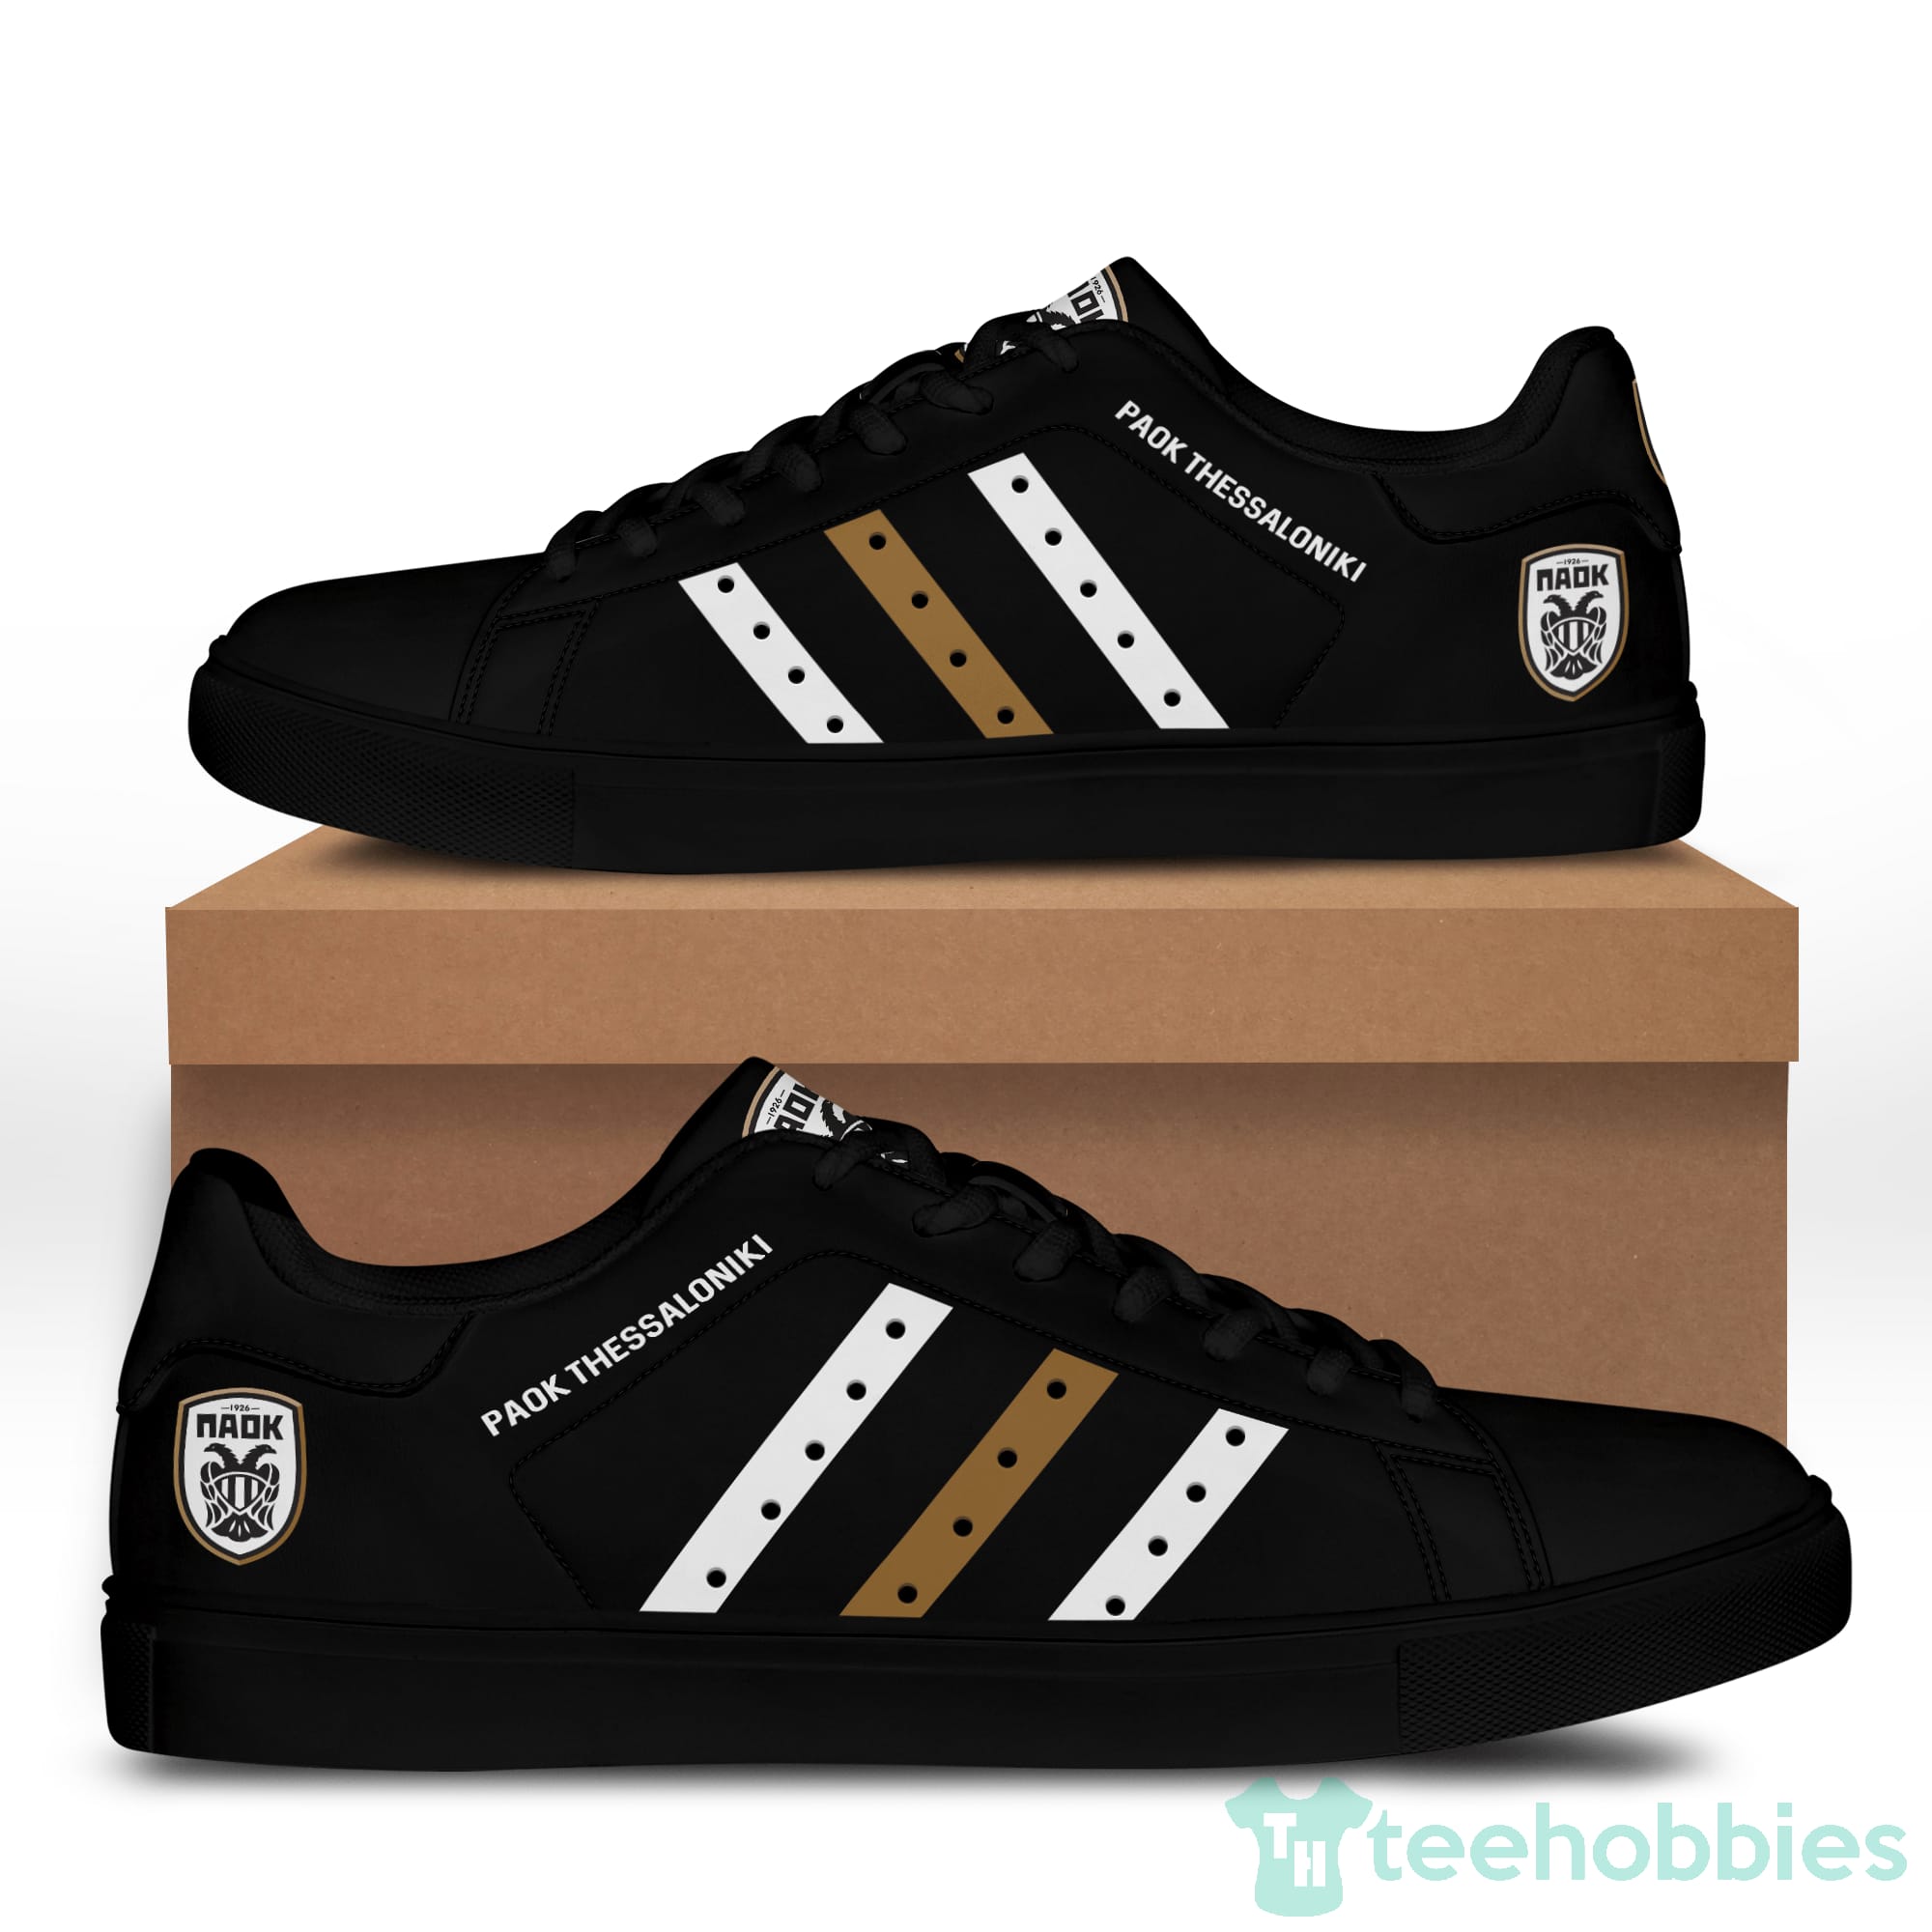 Paok Thessaloniki Low Top Skate Shoes Product photo 2